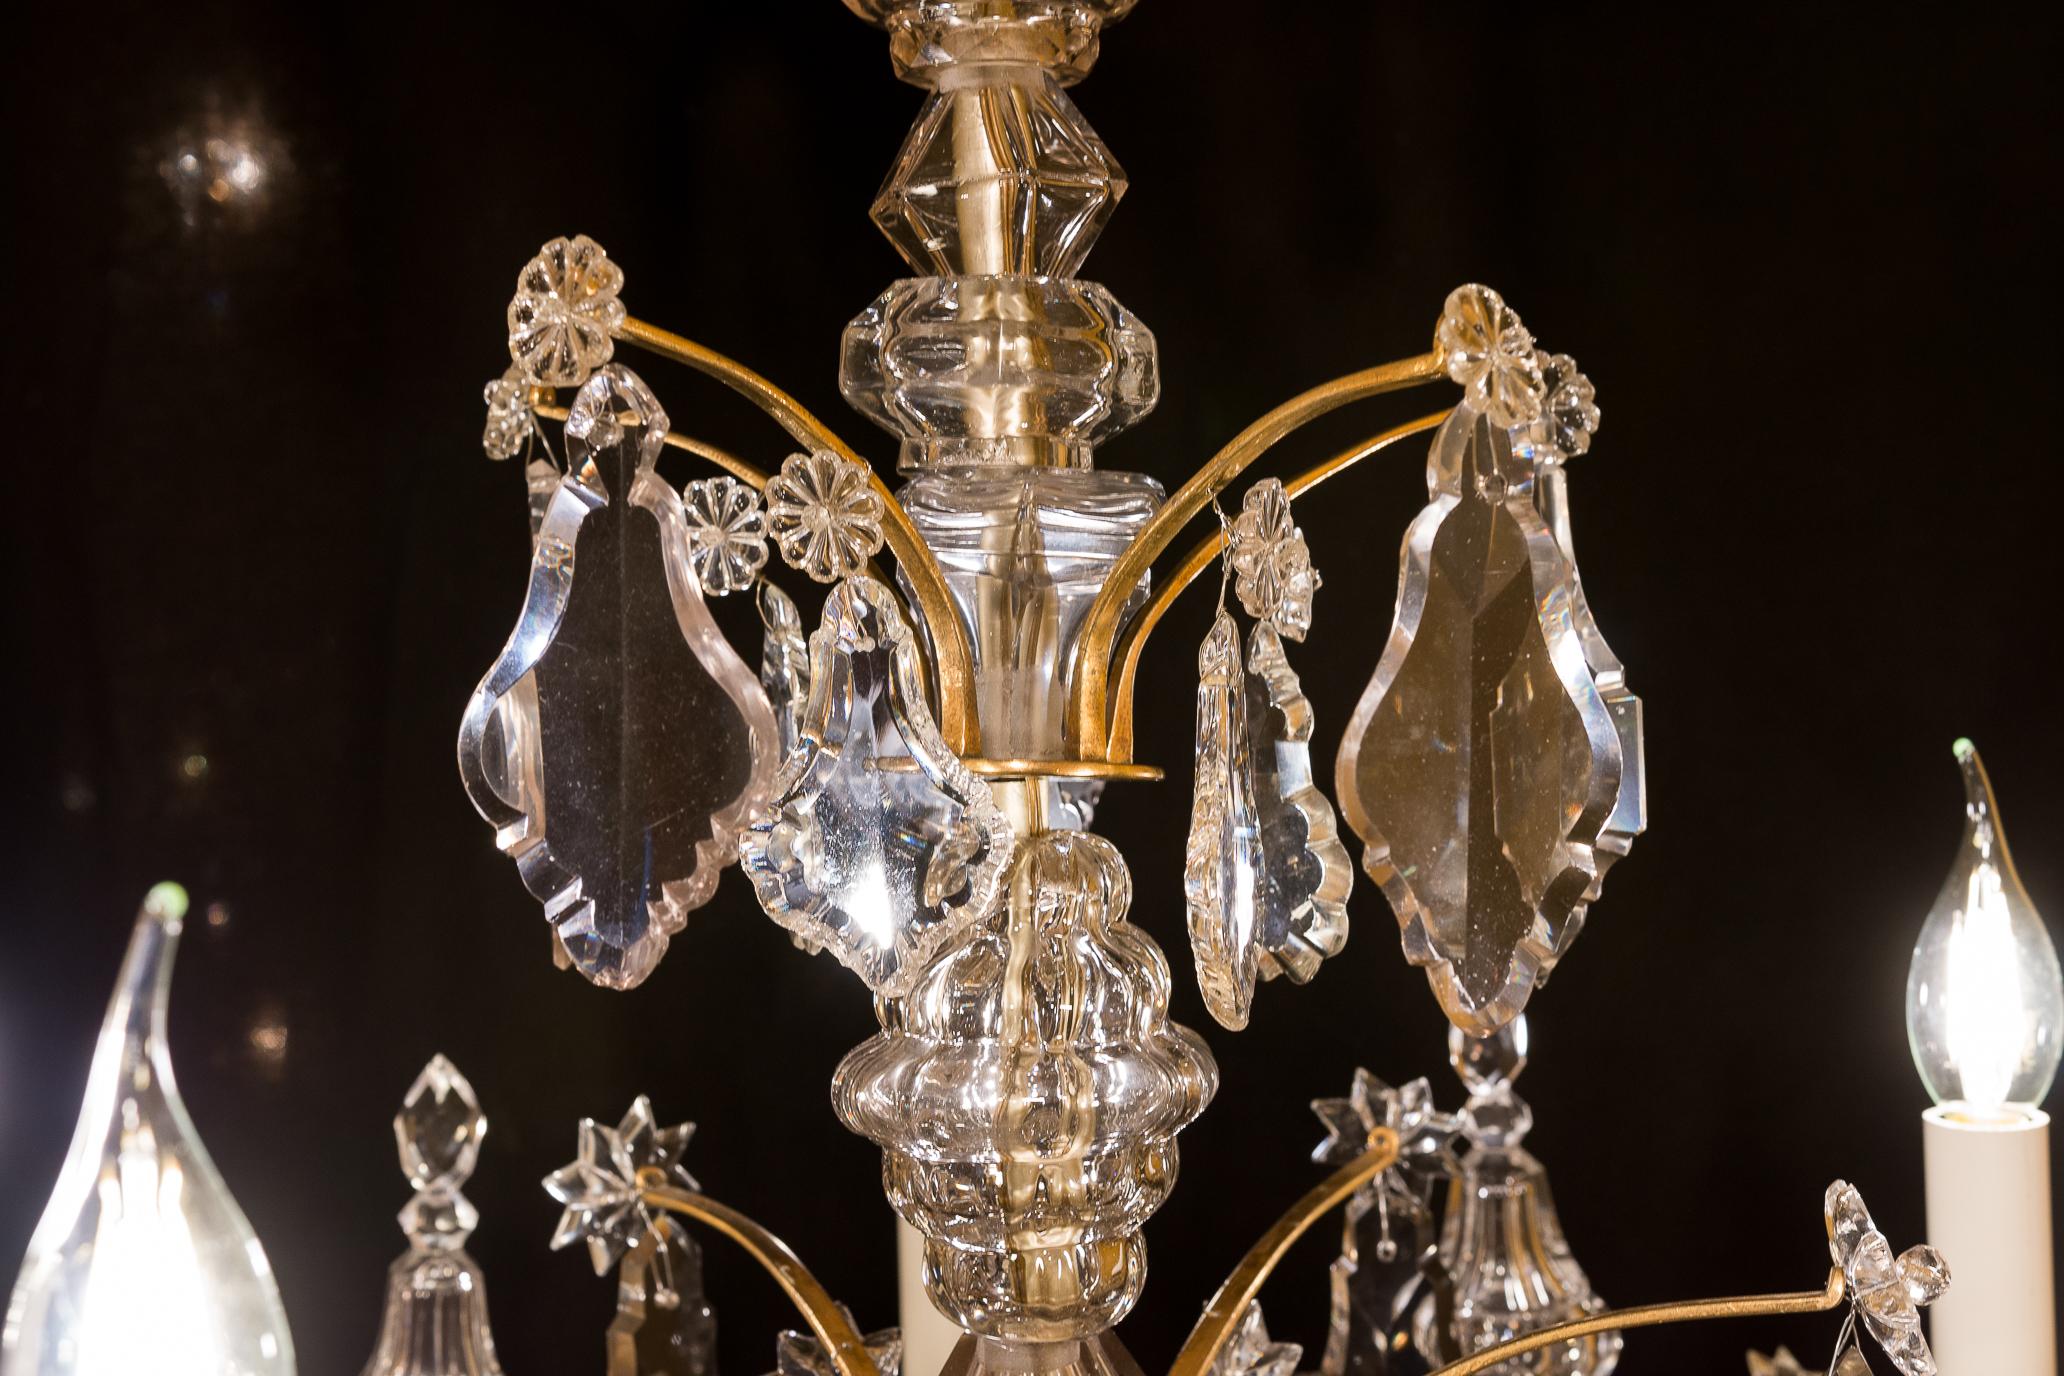 French Sign by Cristalleries De Baccarat Gilt-Bronze & Cut Crystal Chandelier c. 1880